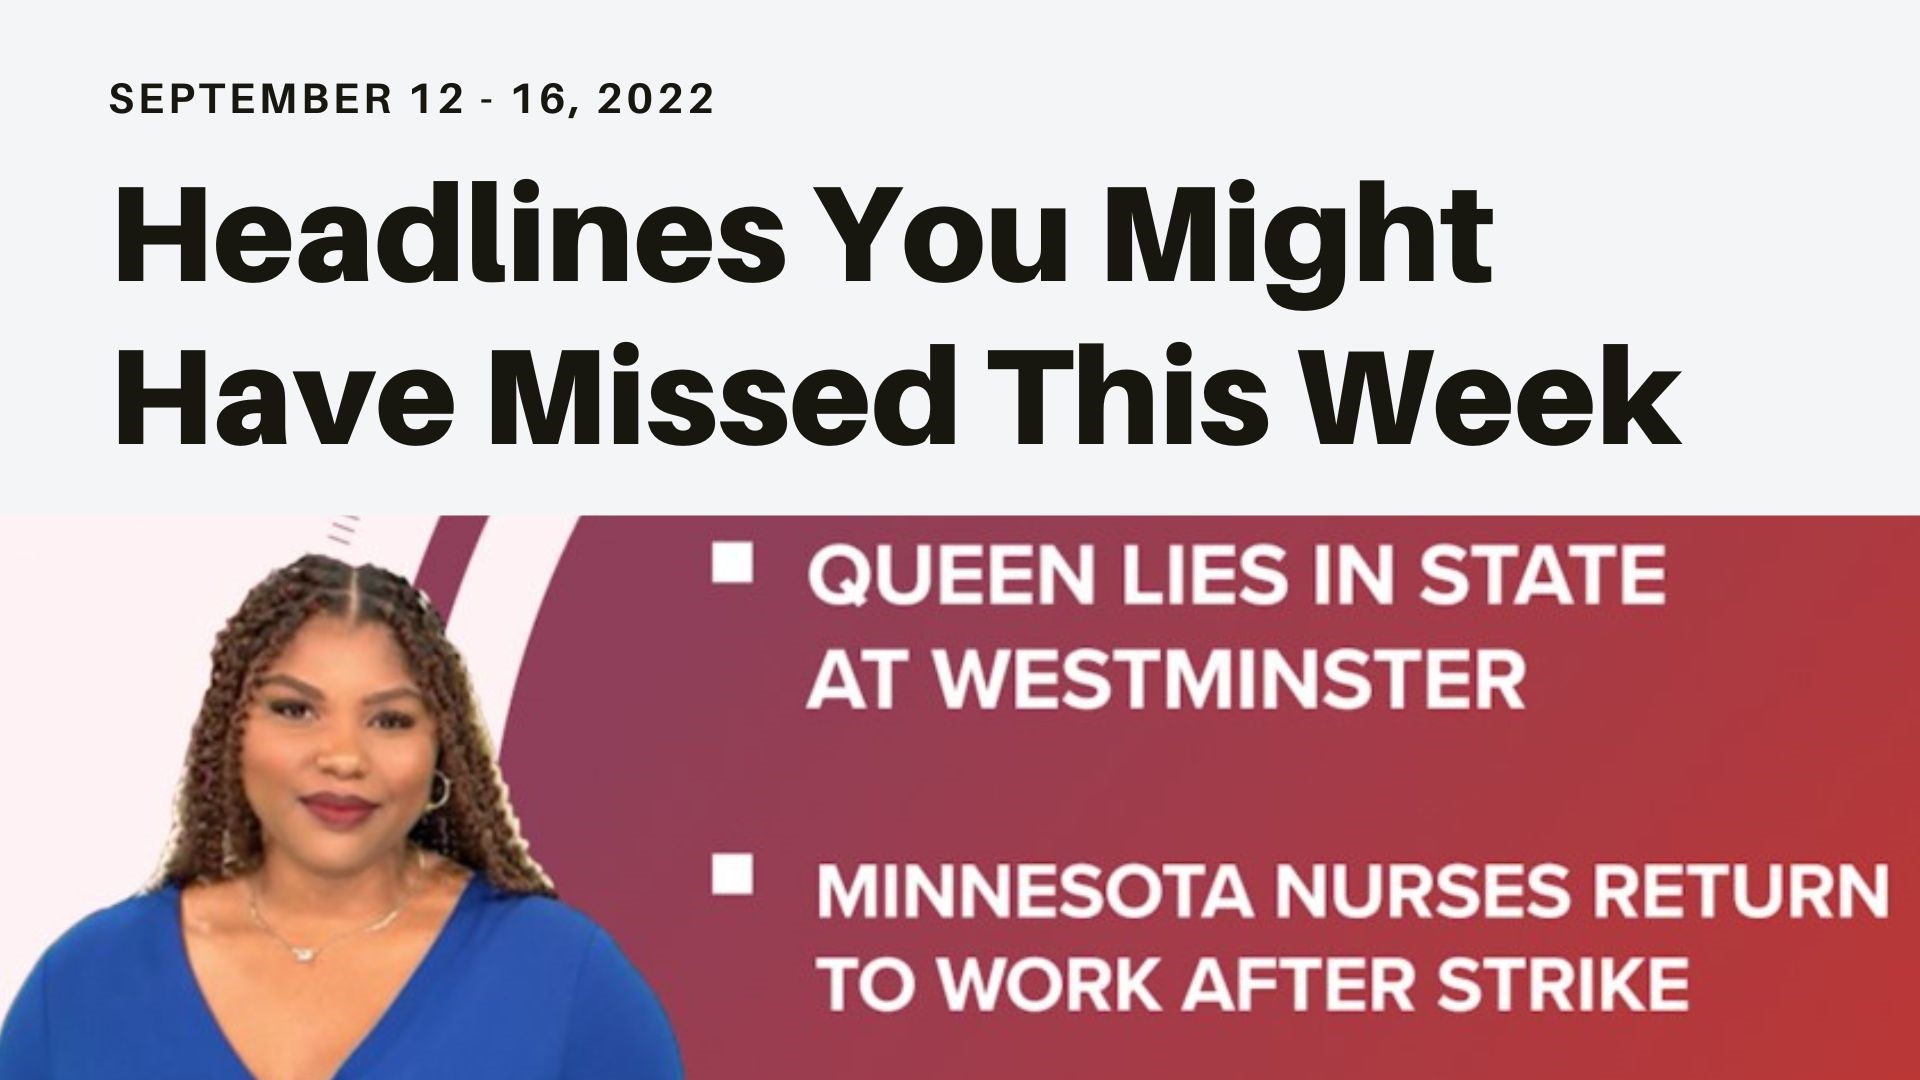 A look at what you might have missed in the news this week from nurses going strike to Queen Elizabeth lying in state and the start of Hispanic Heritage month.